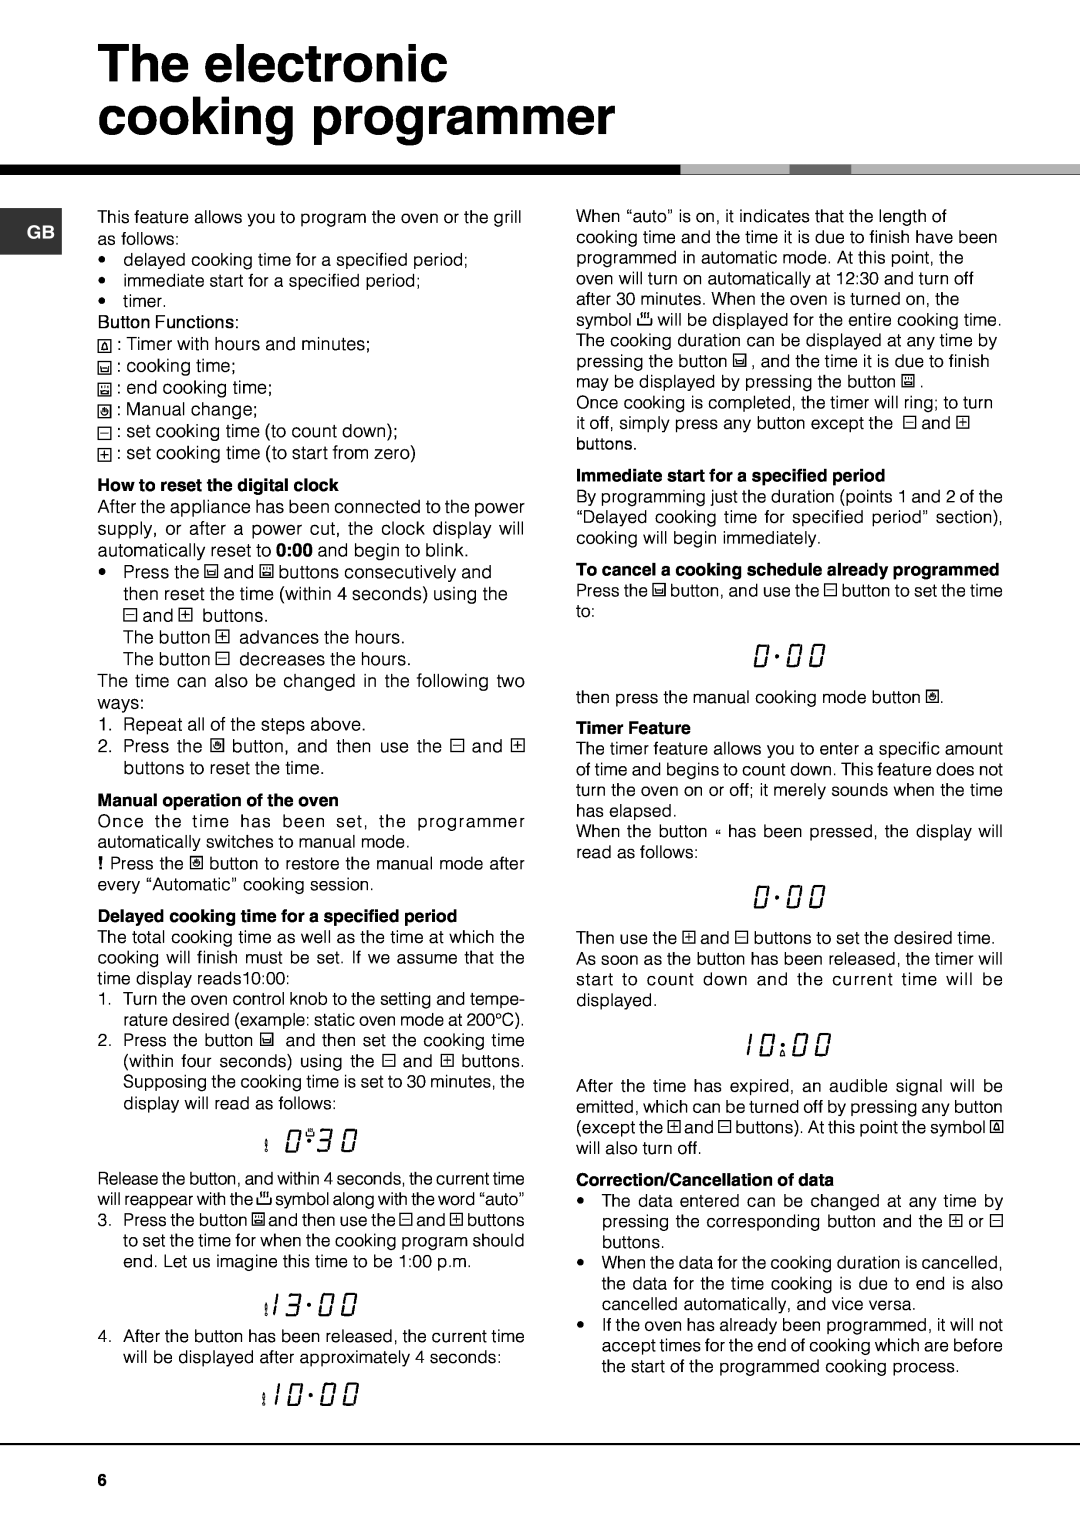 Hotpoint X SY51, SY56X, SY51X, SY10 operating instructions The electronic cooking programmer 